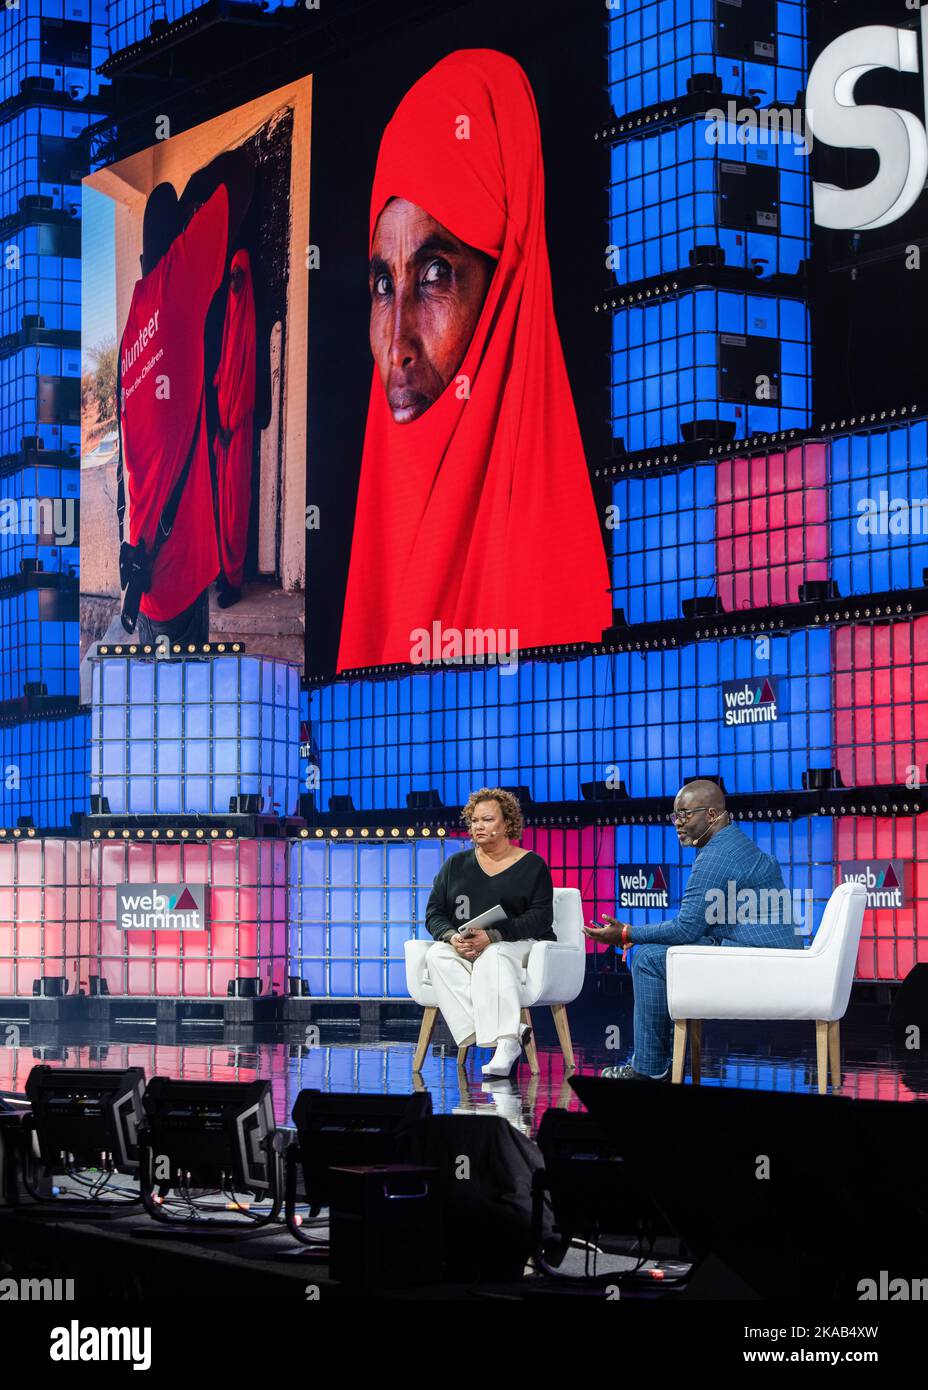 Lisbon, Portugal. 01st Nov, 2022. VP of Environmental Initiatives of Apple, Lisa Jackson (L), and Founder of Southbank Centre and Culture3, Misan Harriman (R), seen addressing the audience at Altice Arena Centre Stage during the opening night of the Web Summit 2022. The biggest technology conference in the world is back in Lisbon. For four days, new technological trends will be discussed and how they will influence our lives. 70,000 people are expected at the event. (Photo by Hugo Amaral/SOPA Images/Sipa USA) Credit: Sipa USA/Alamy Live News Stock Photo